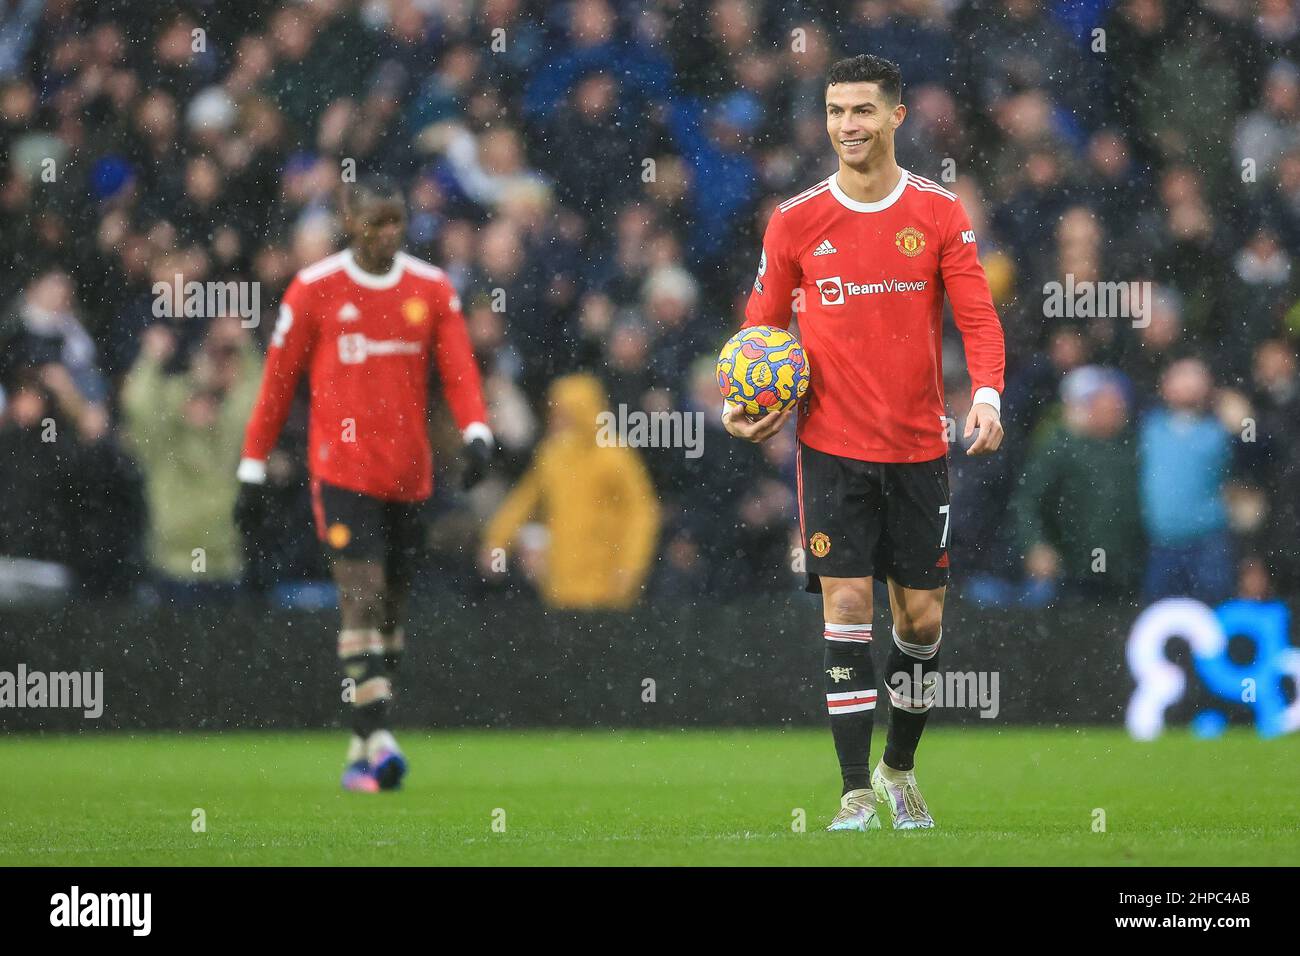 Cristiano Ronaldo #7 of Manchester United smiles as he is jeered buy the Leeds United fans in, on 2/20/2022. (Photo by Mark Cosgrove/News Images/Sipa USA) Credit: Sipa USA/Alamy Live News Stock Photo